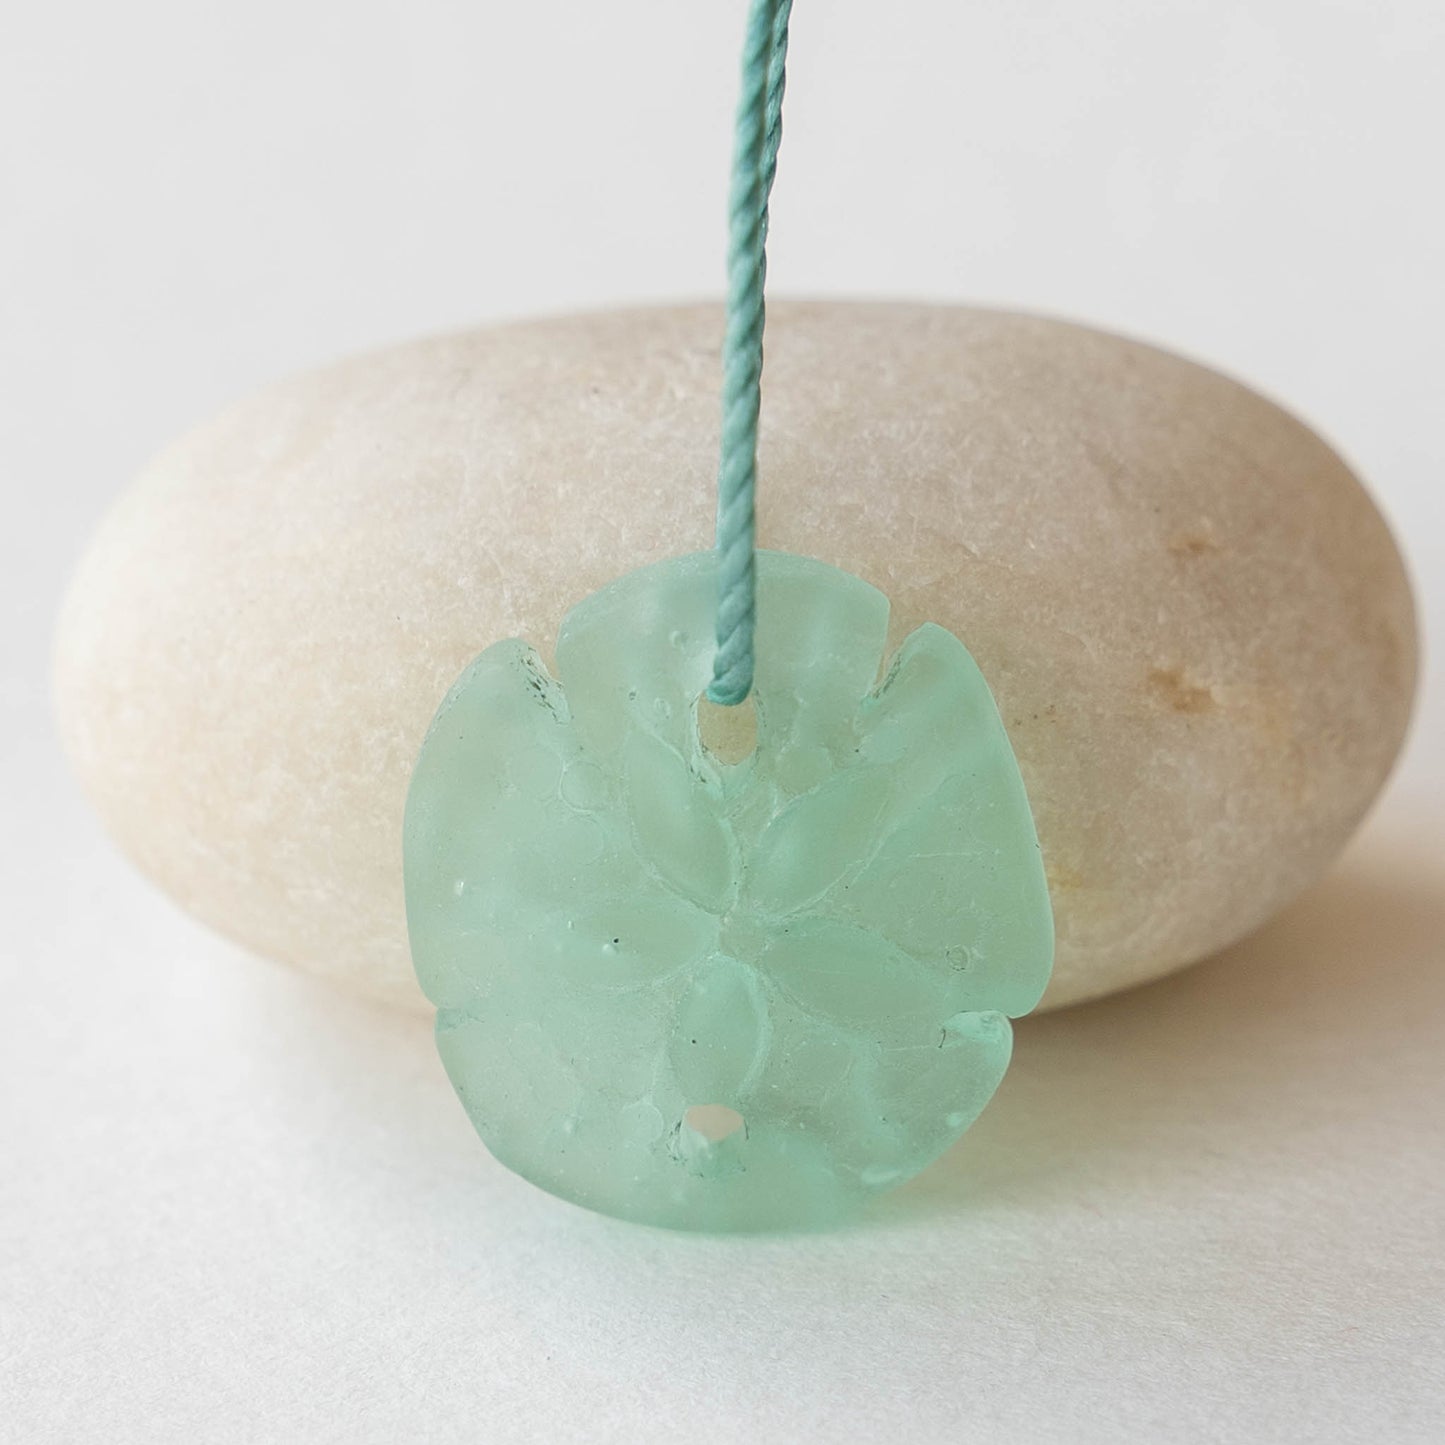 19x21mm Frosted Glass Sand Dollar Beads  - Seafoam - 6 Beads